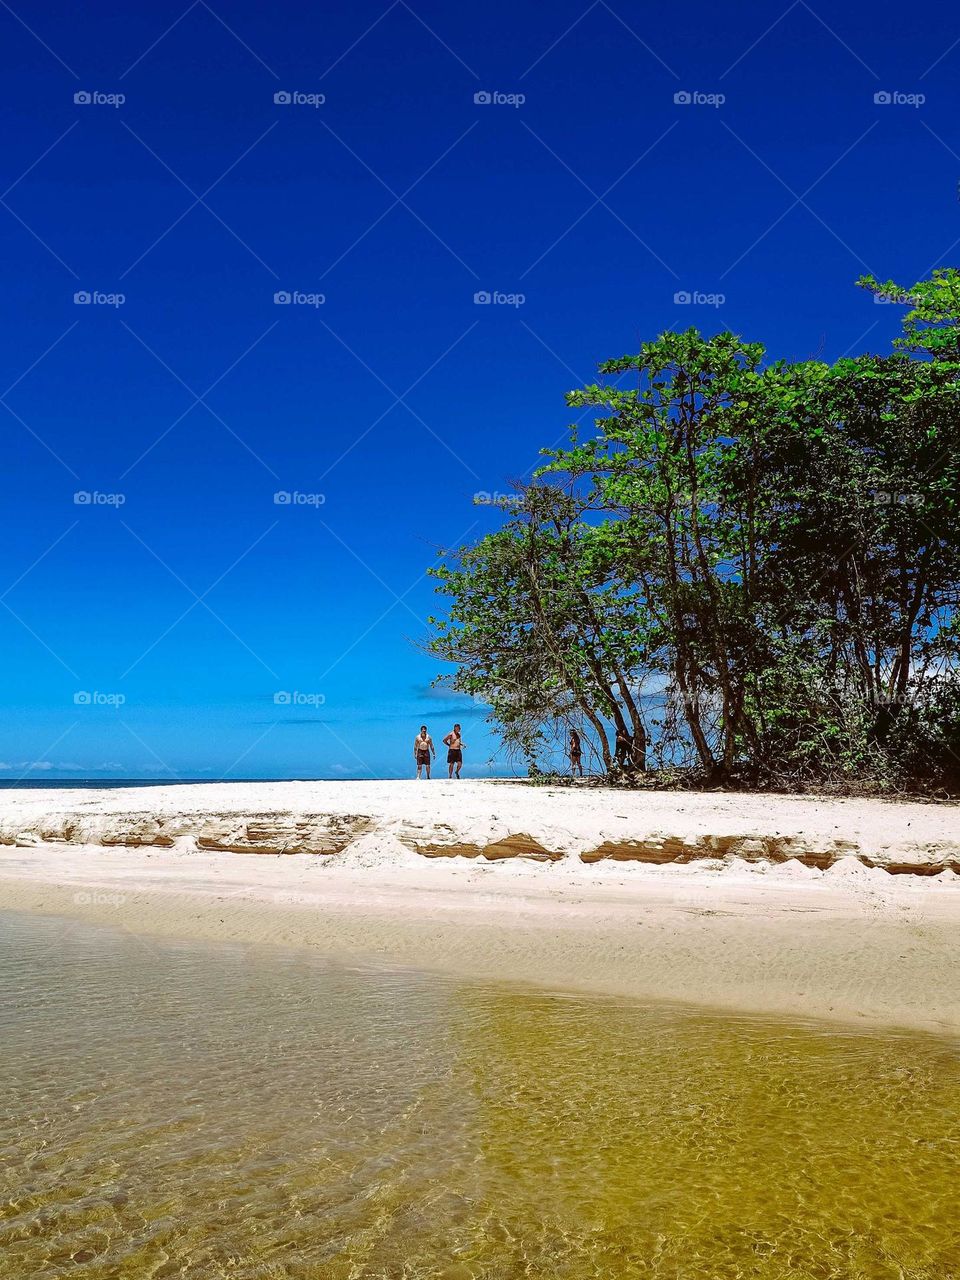 People on the beach, next to a river. There's a beautiful Blue Sky, some trees and two persons standing at the distance.
Holiday Vacation Summer Paradise.